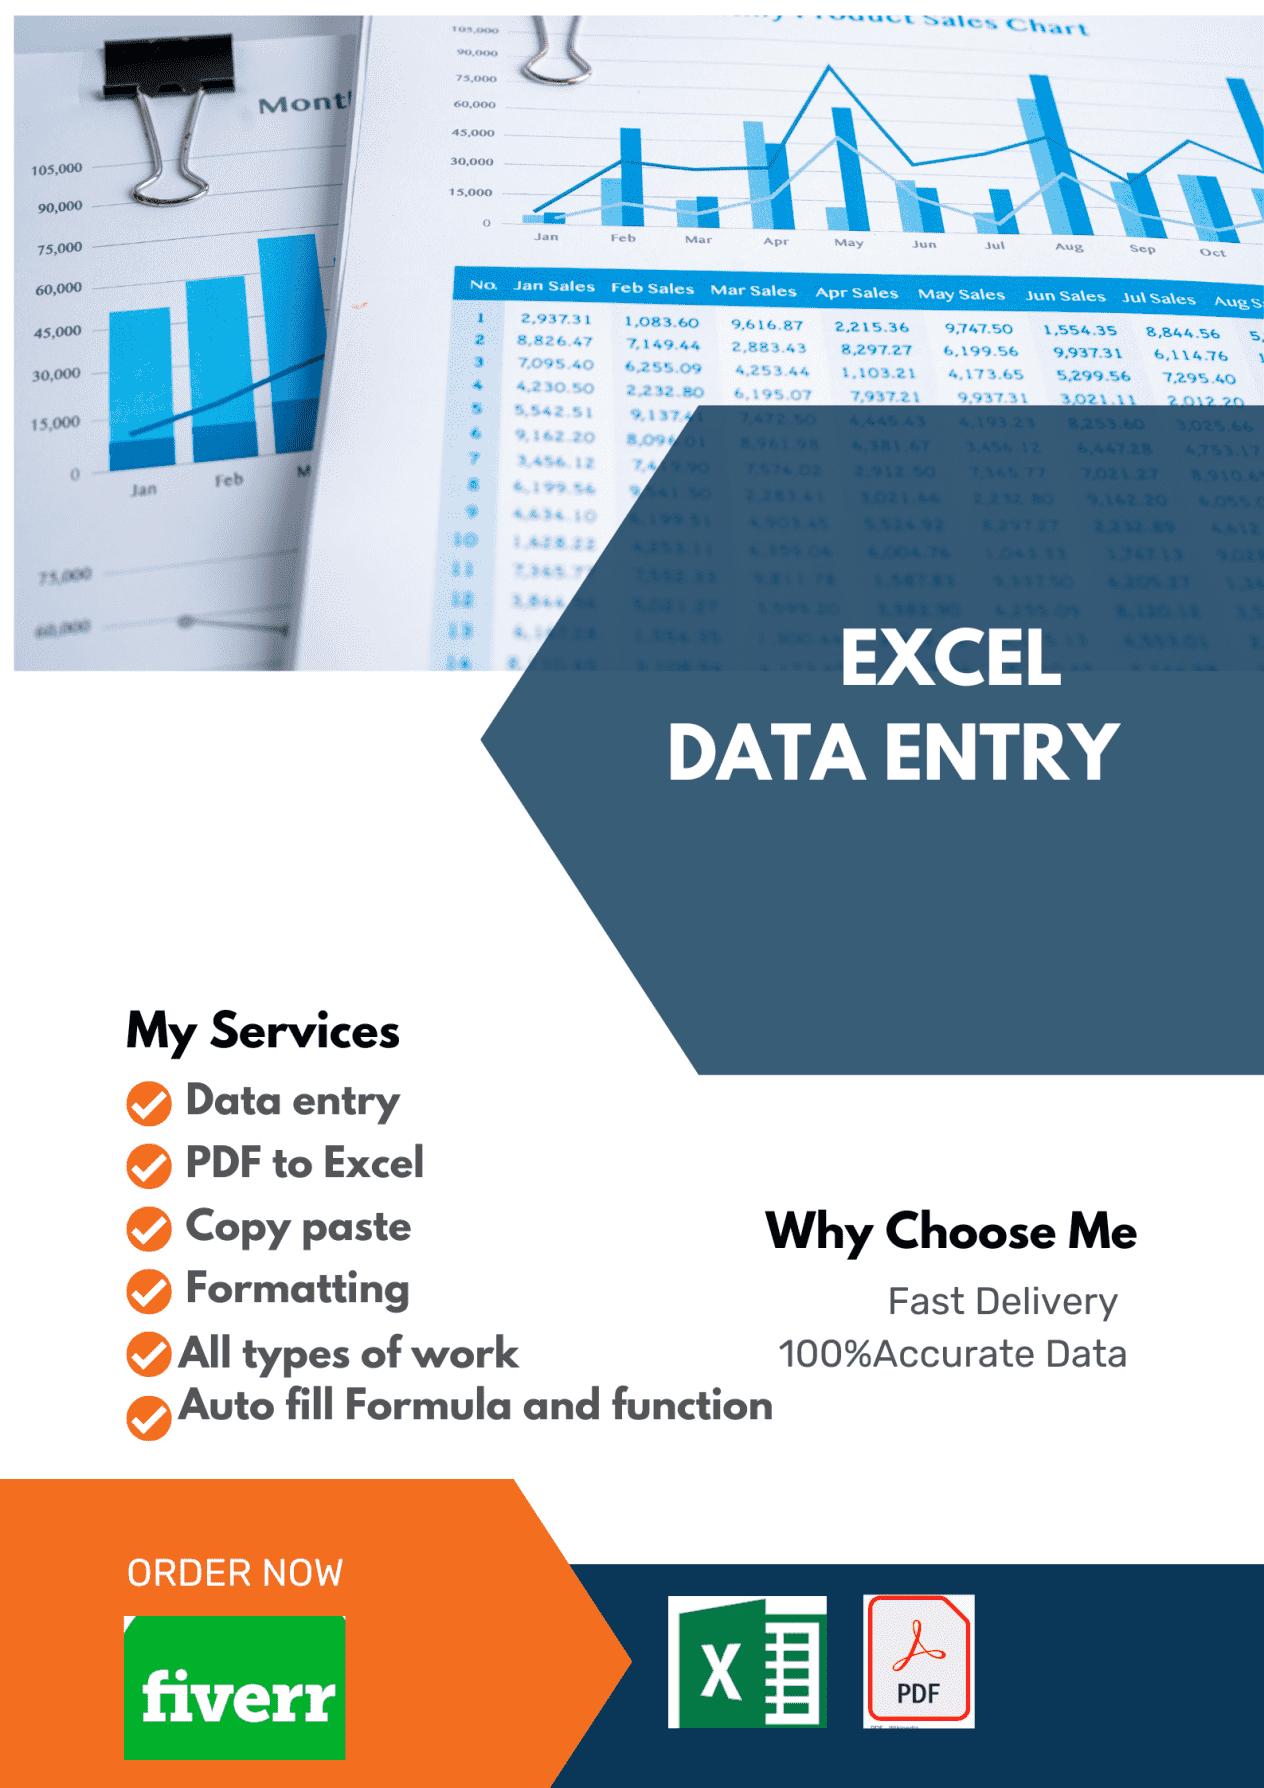 do expert data entry PDF to excel copy paste work